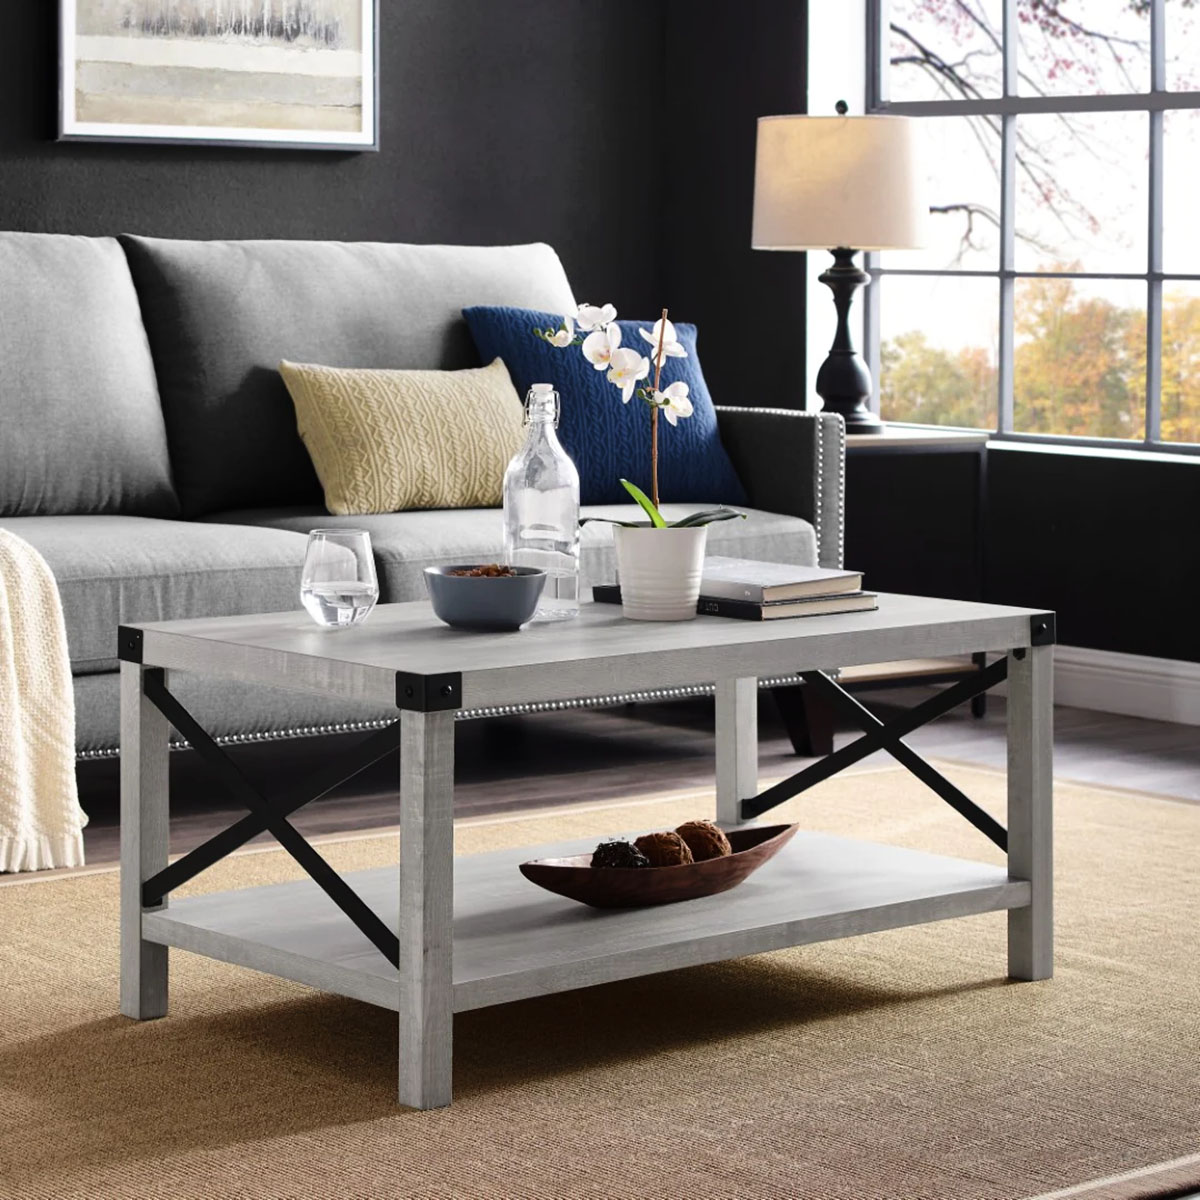 How To Decorate A Farmhouse Coffee Table